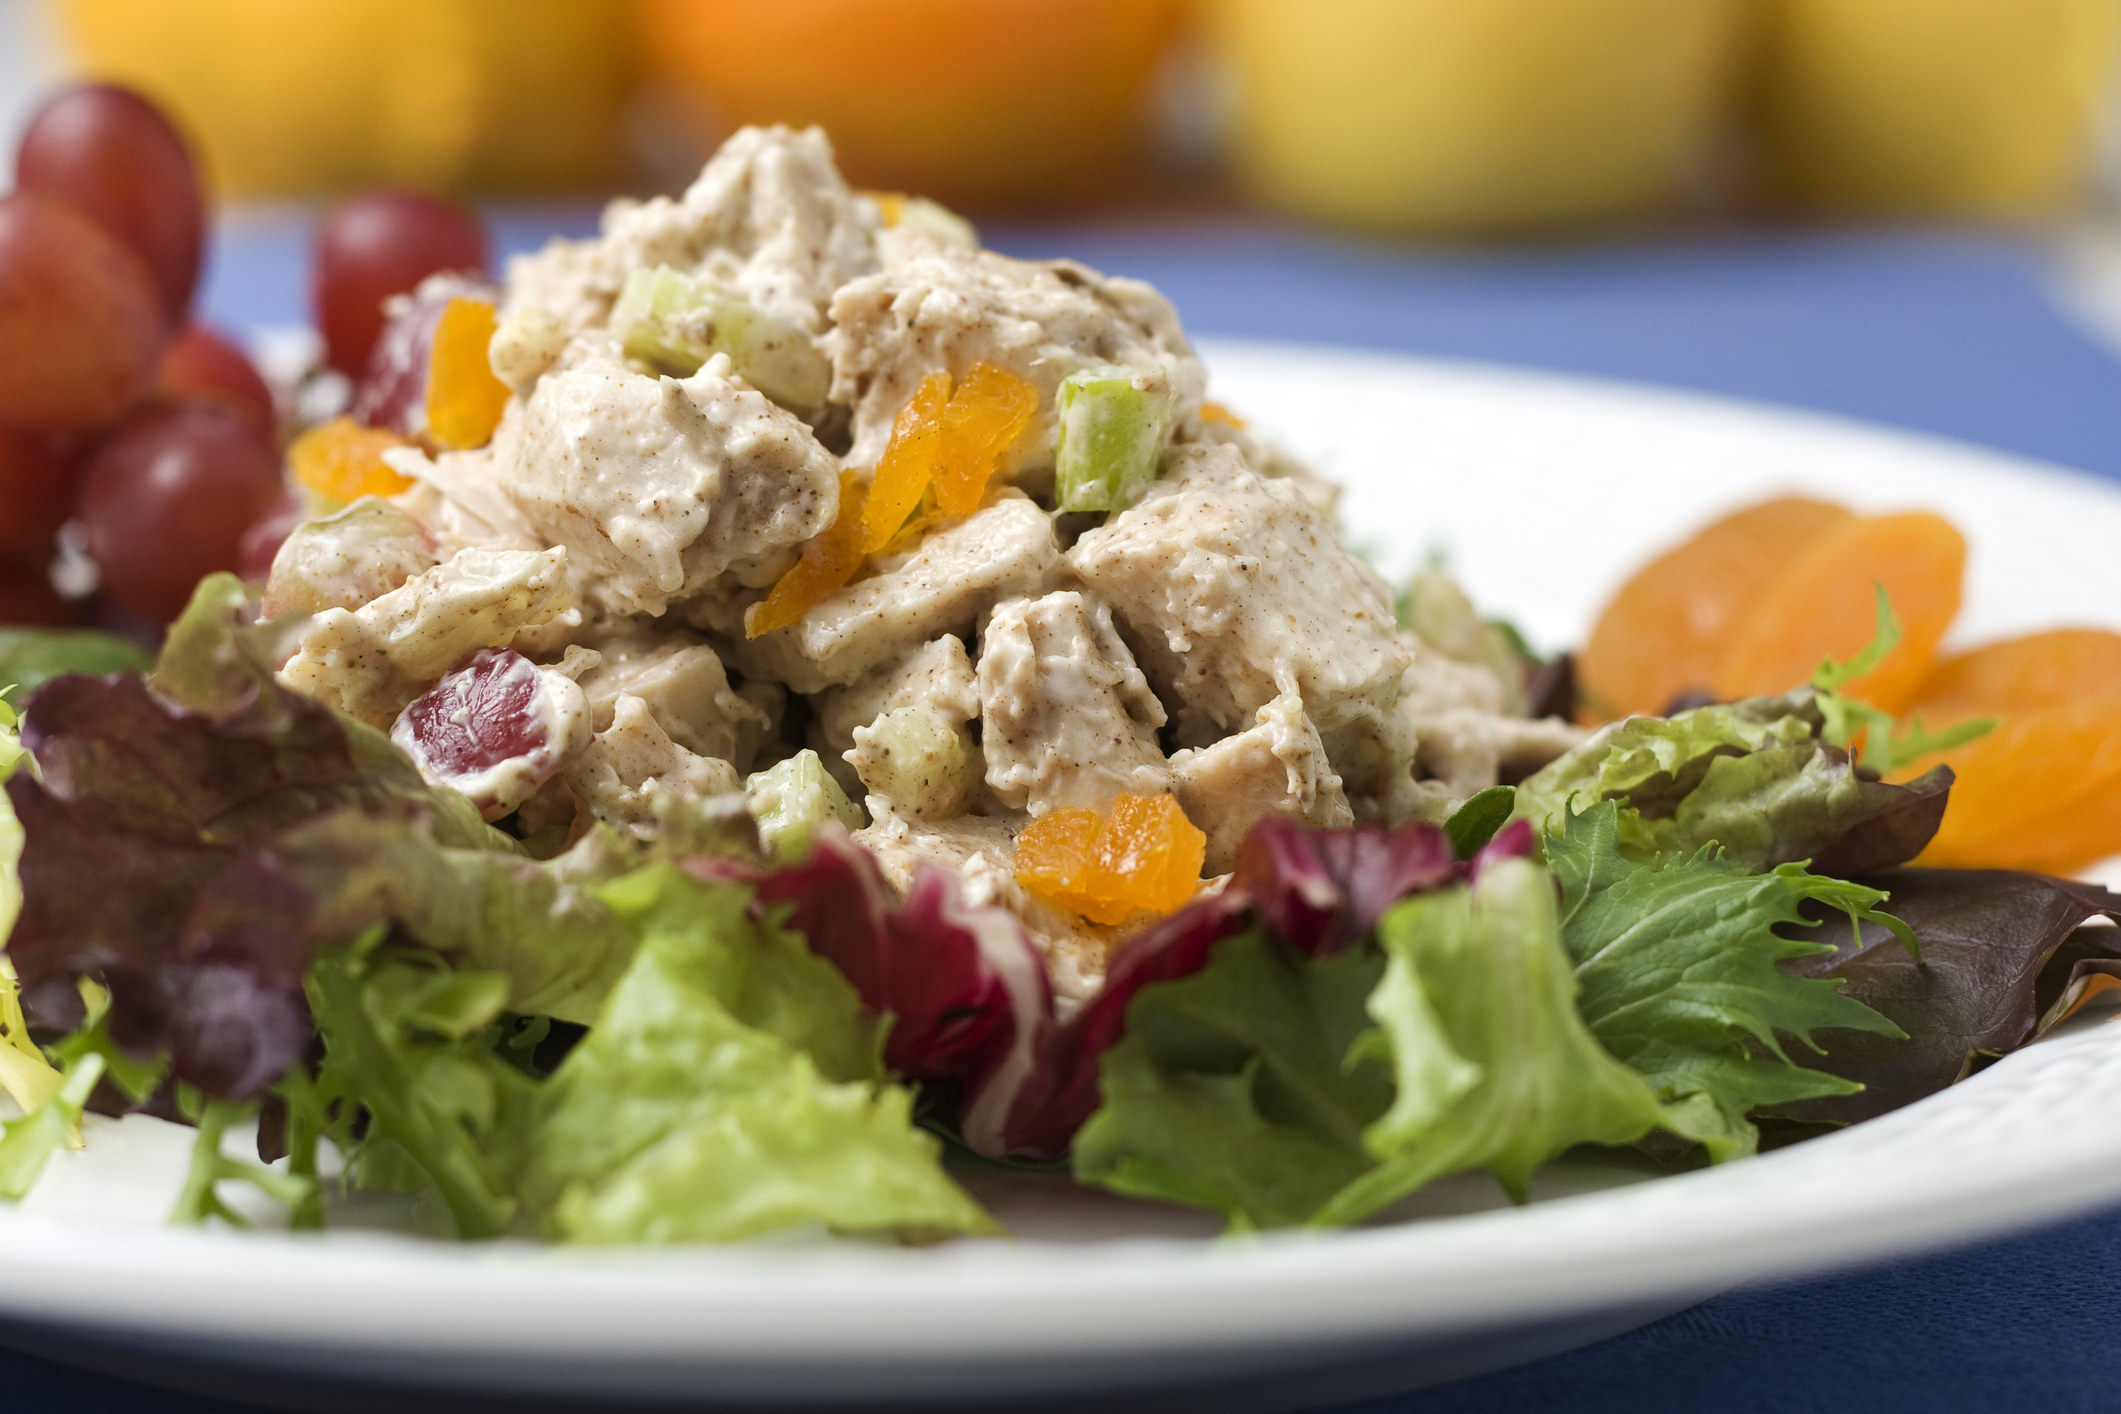 Curried spiced chicken salad with dried apricots and grapes.